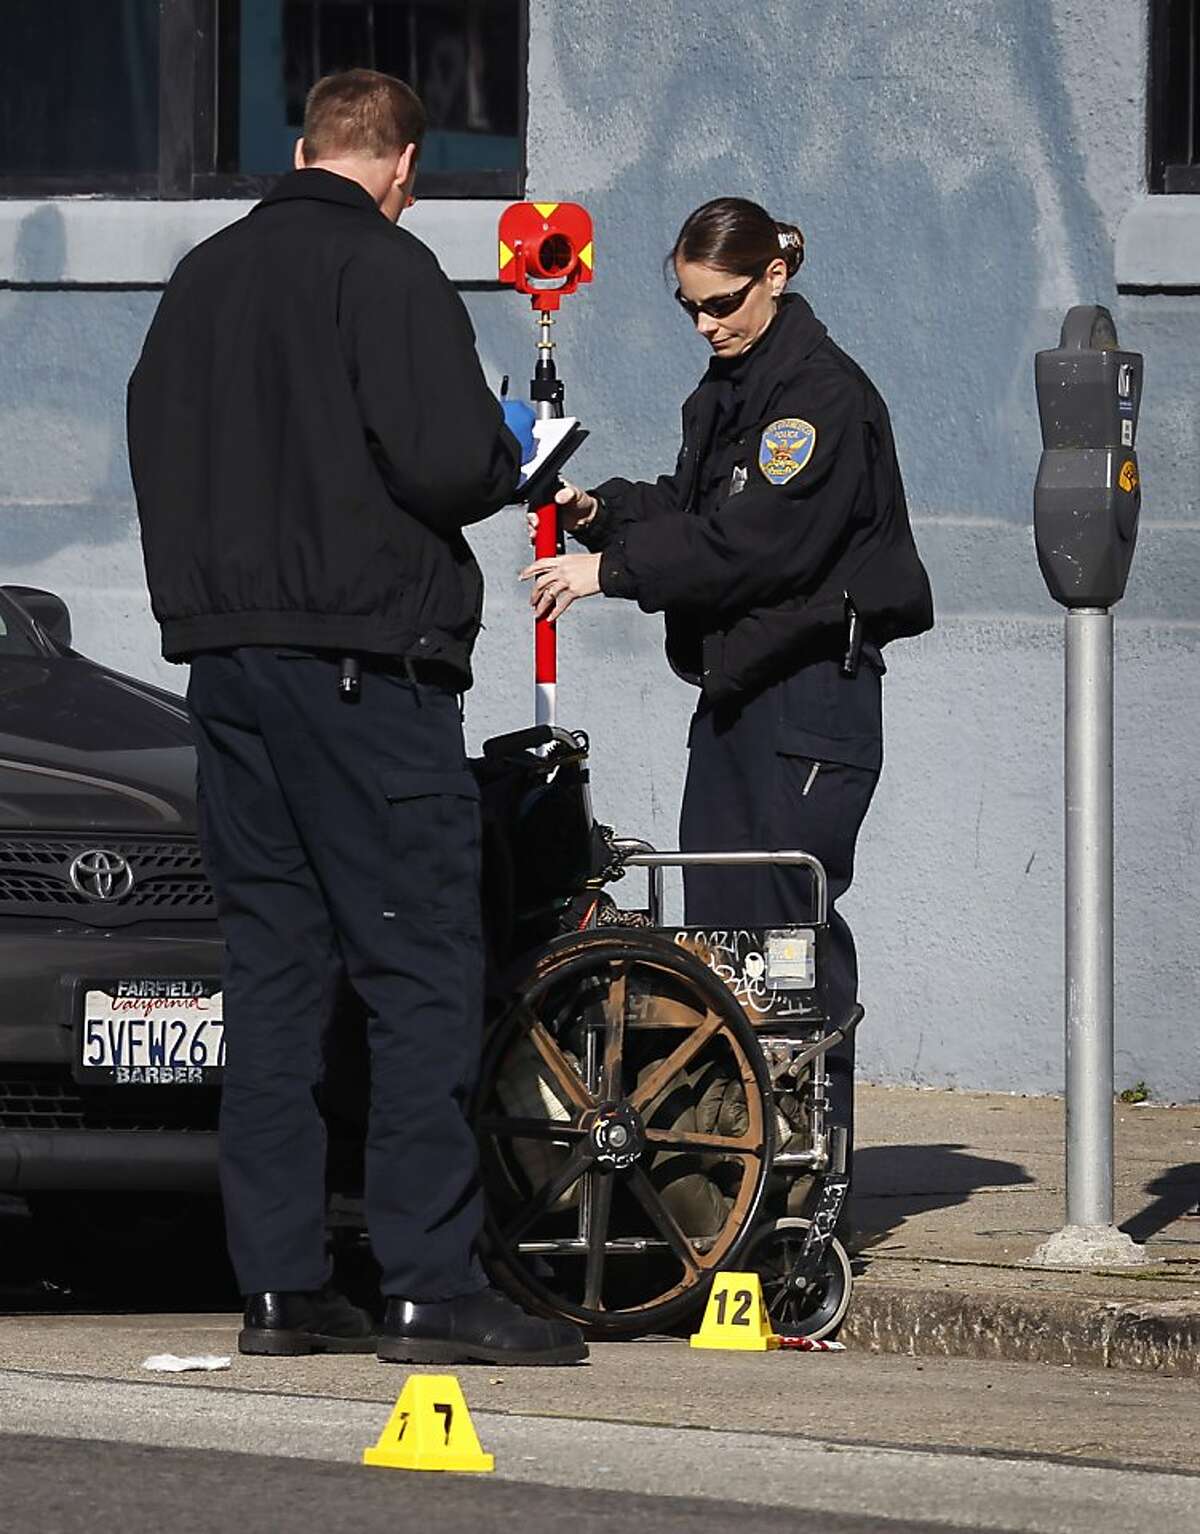 Crime scene investigators gather evidence after police officers shot a man in a wheelchair who reportedly threatened them with a knife in San Francisco, Calif., on Tuesday, Jan. 4, 2011.